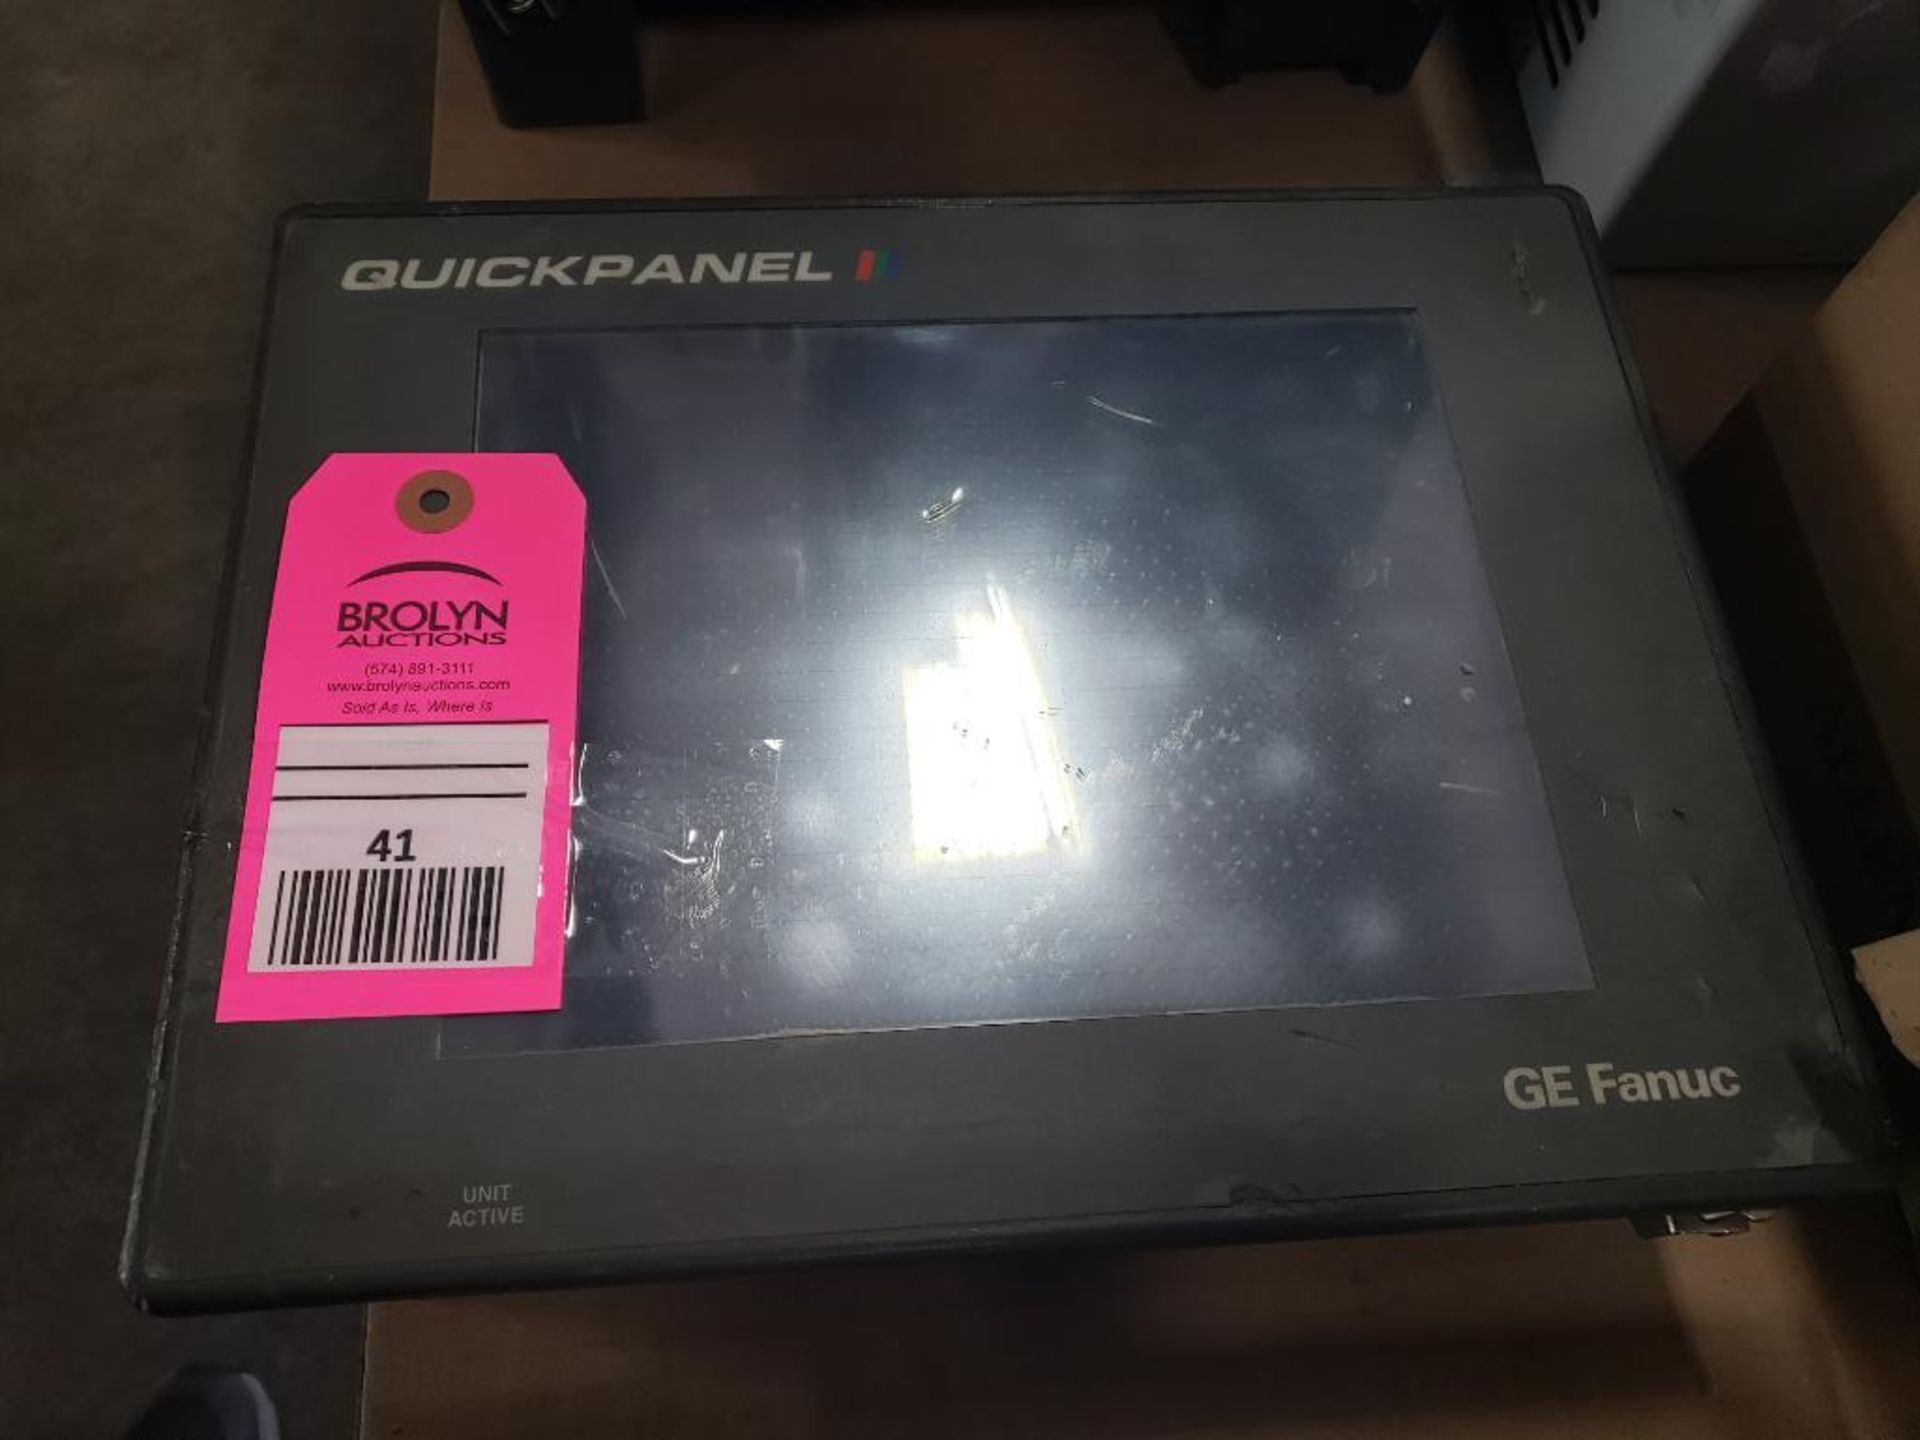 GE Fanuc Quickpanel GQPI2130S2P-C color 10.5" STN touchscreen user interface.